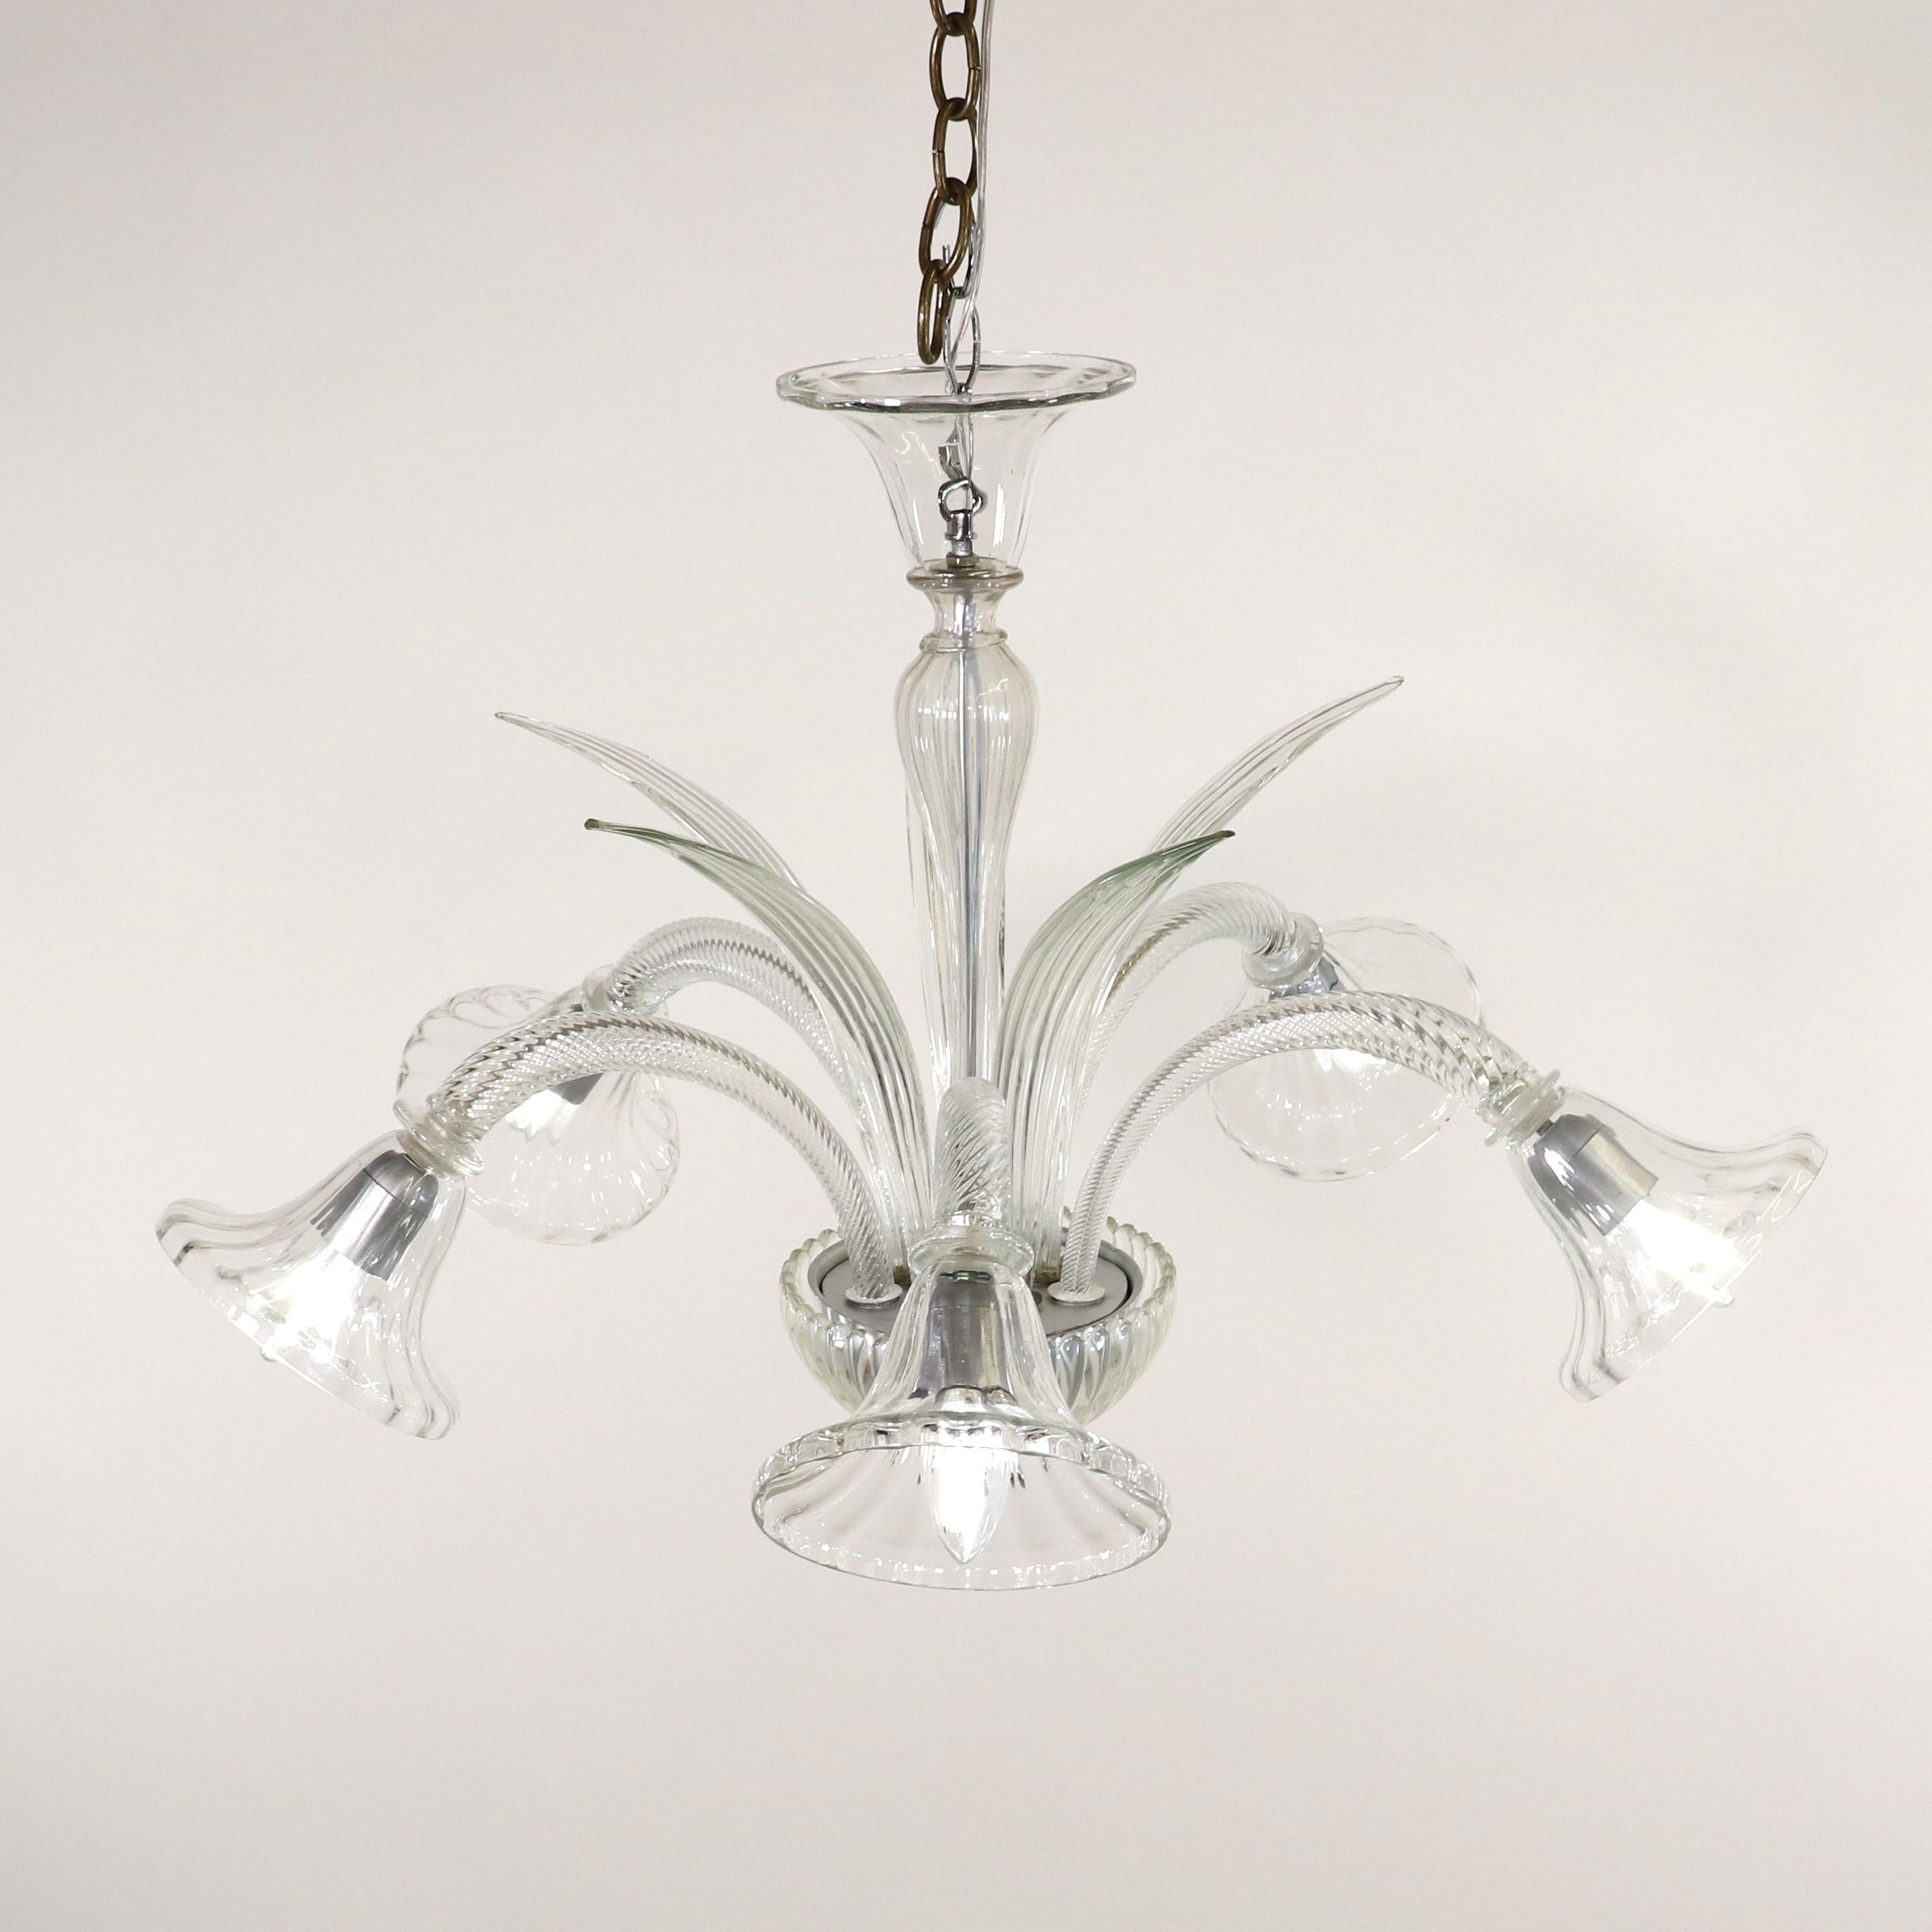 Italian Mid-Century Five Arm Ribbed and Scalloped Cristallo Murano Chandelier For Sale